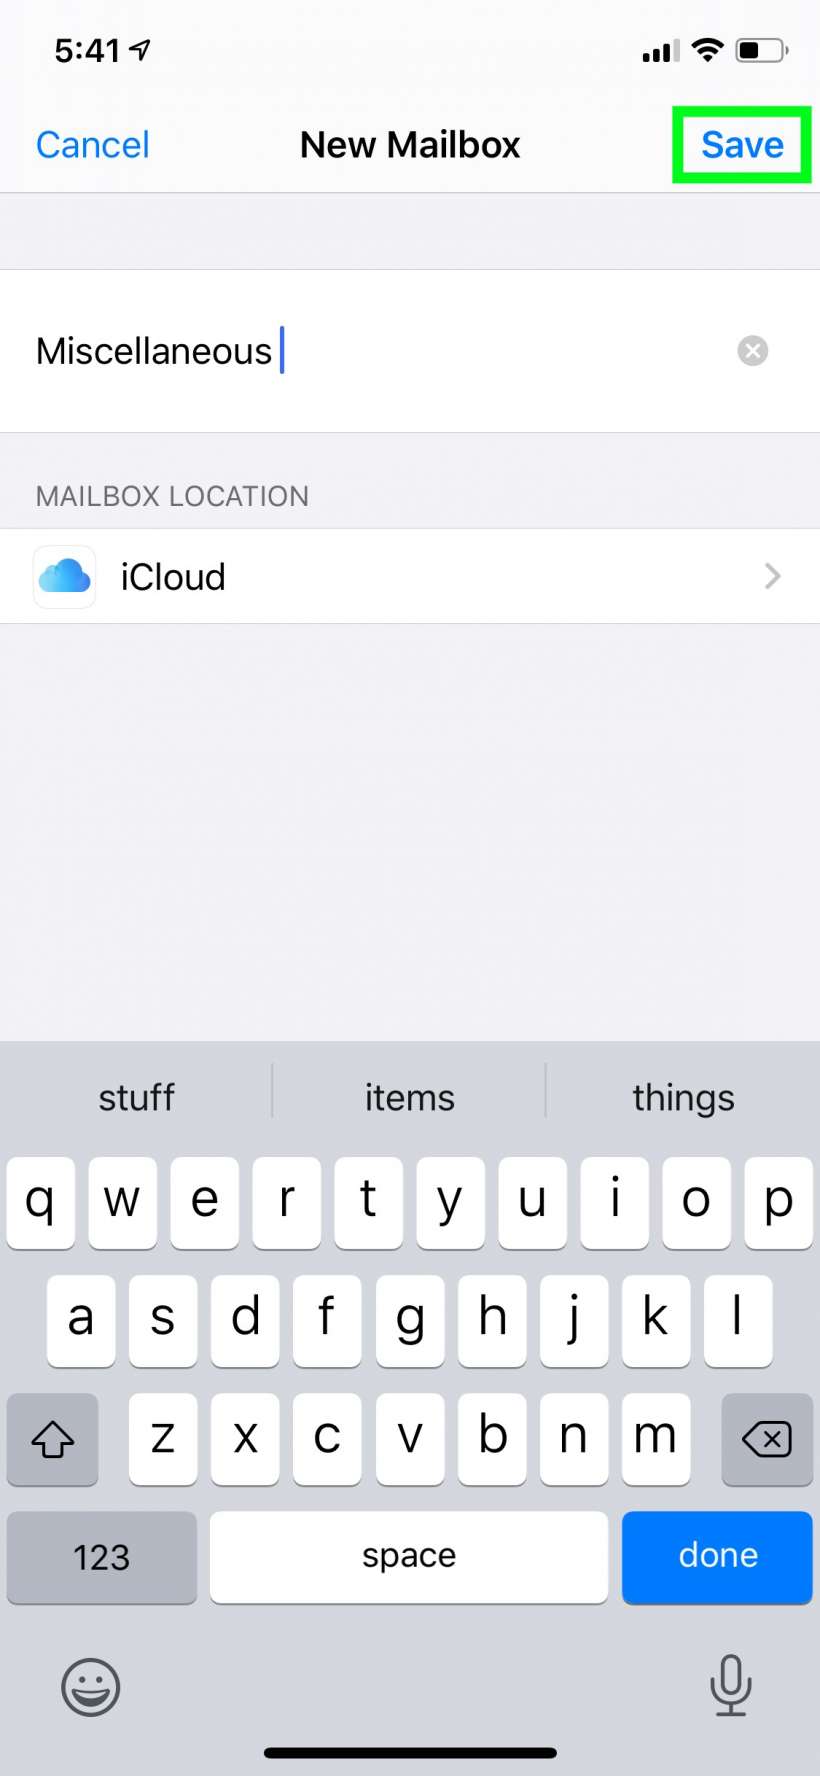 How to create folders and sub-folders in the Mail app on iPhone and iPad.